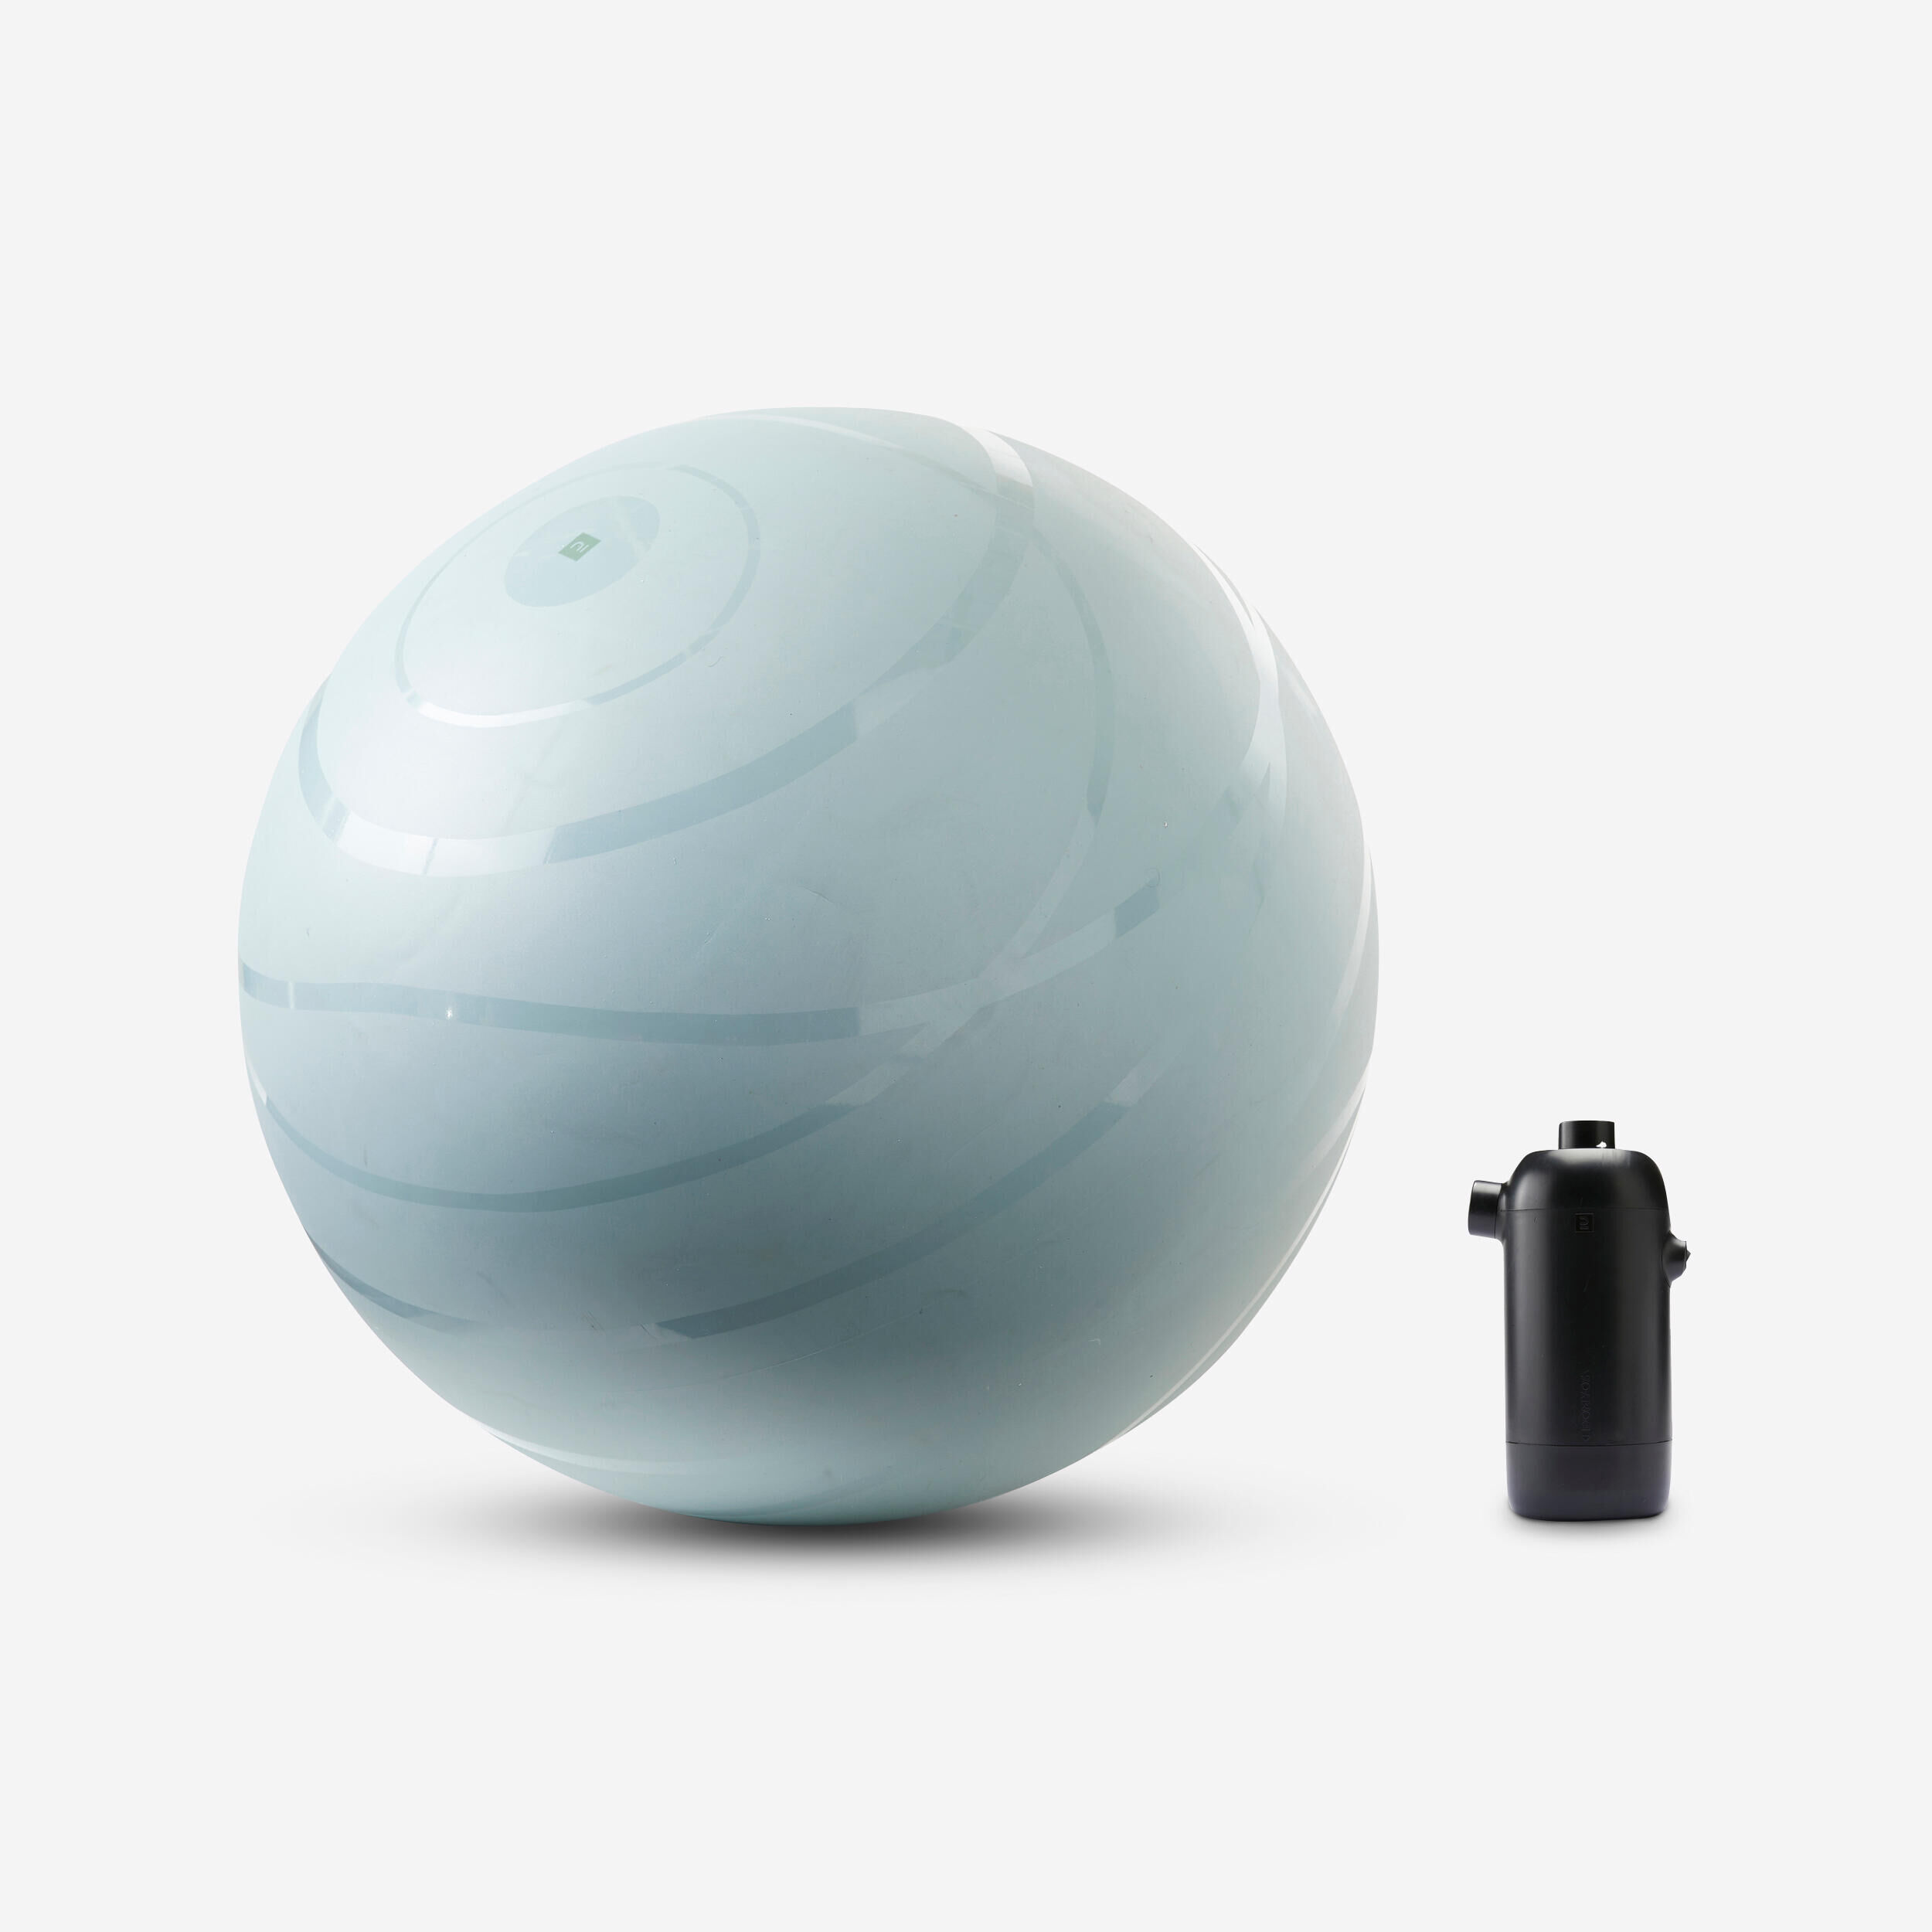 DOMYOS Gym Ball with Pump Included for Quick Inflation/Deflation Size 2/65 cm